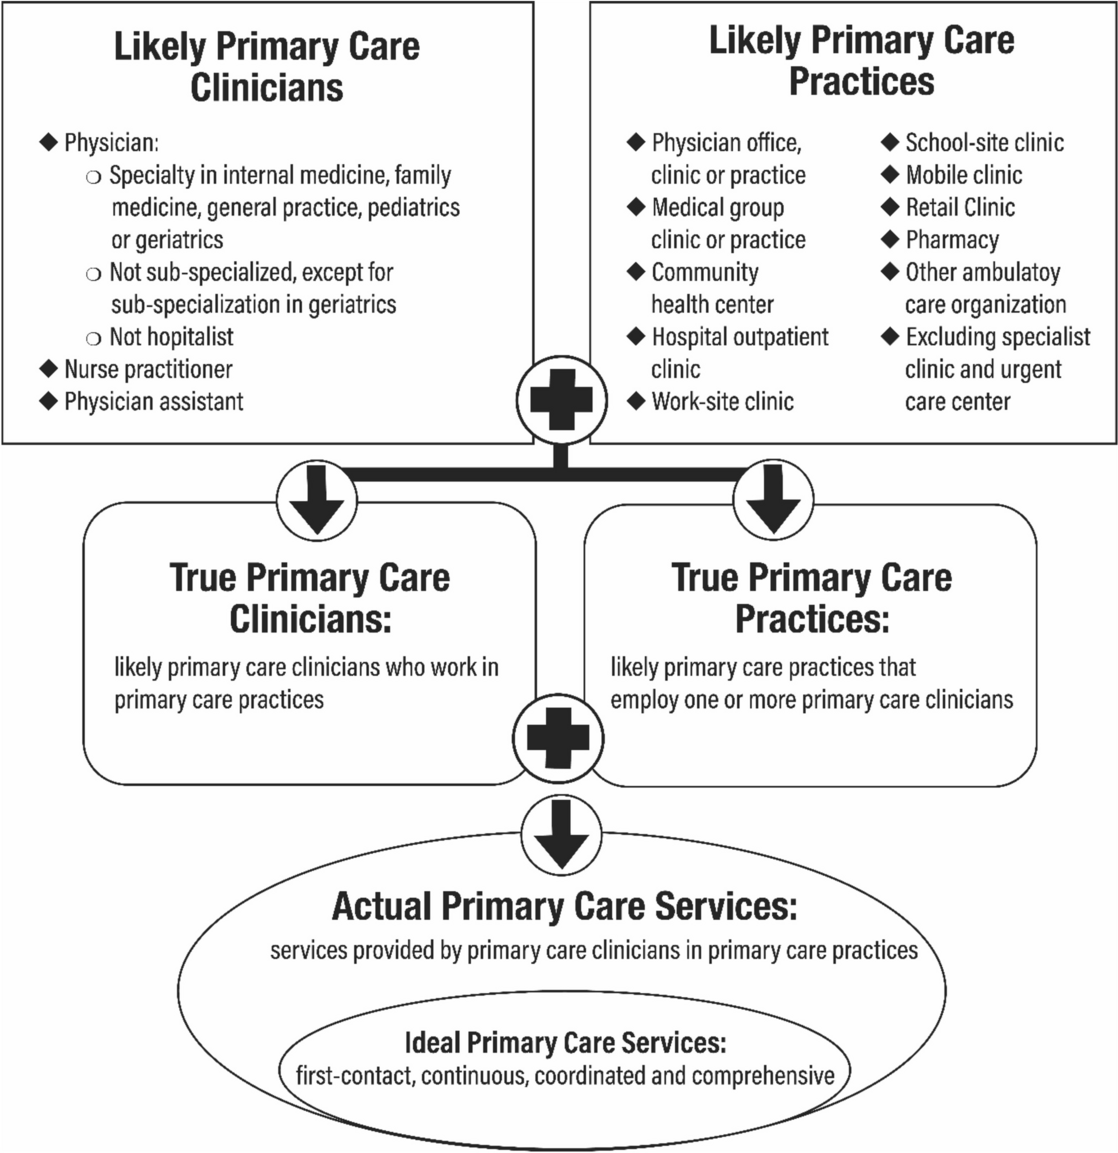 A Pragmatic Approach to Identifying and Profiling Primary Care Clinicians and Primary Care Practices in the USA